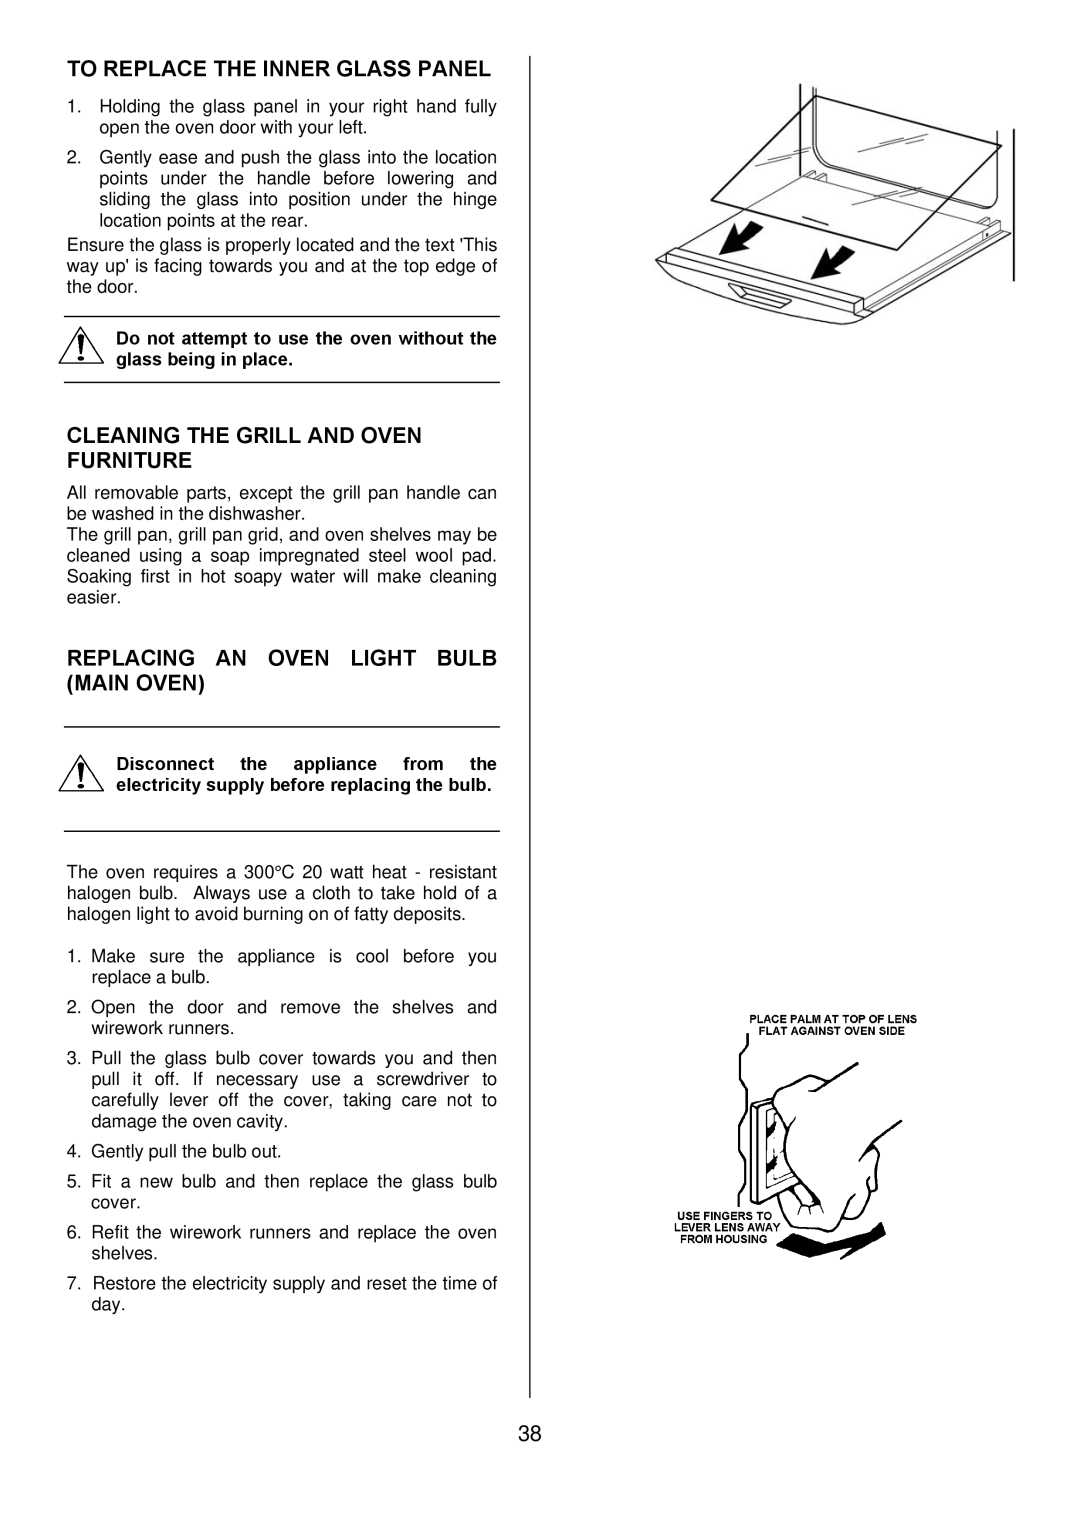 Electrolux D8800-4 operating instructions To Replace the Inner Glass Panel, Cleaning the Grill and Oven Furniture 